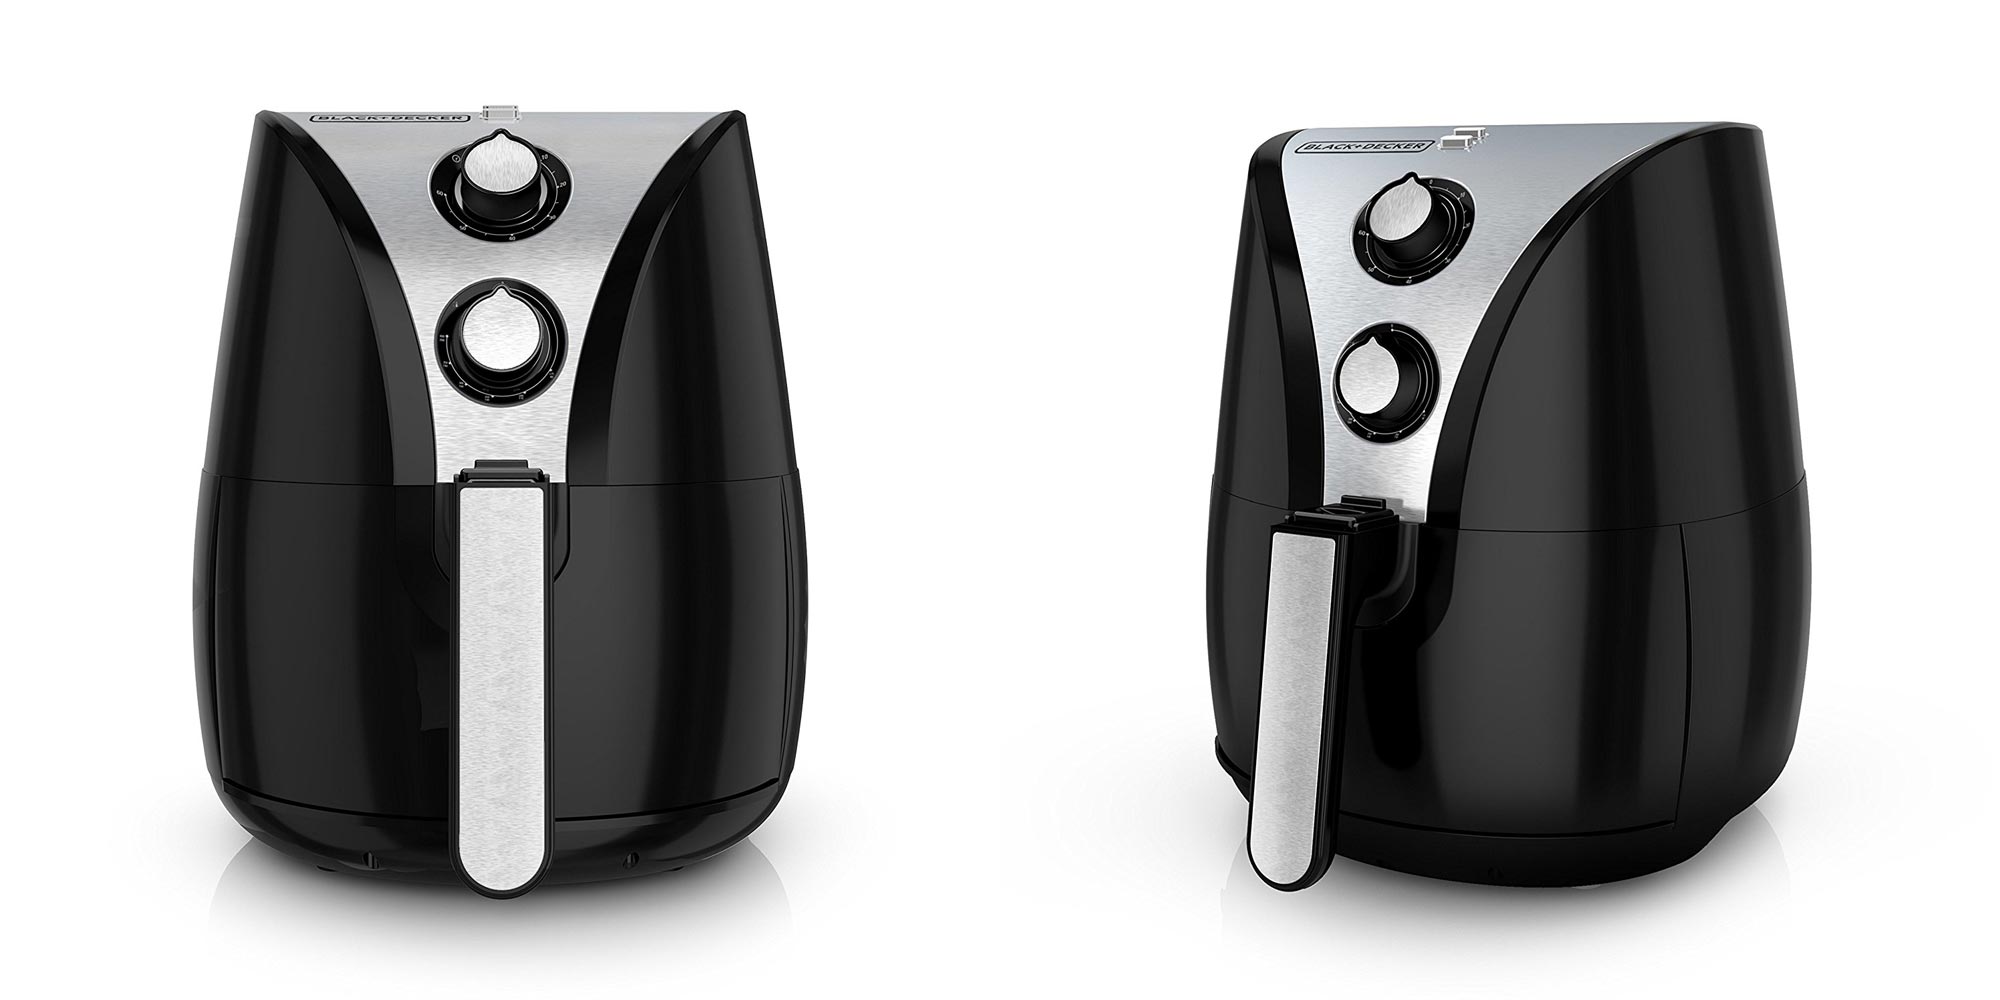 https://9to5toys.com/wp-content/uploads/sites/5/2018/05/black-and-decker-purify-2-liter-air-fryer.jpg